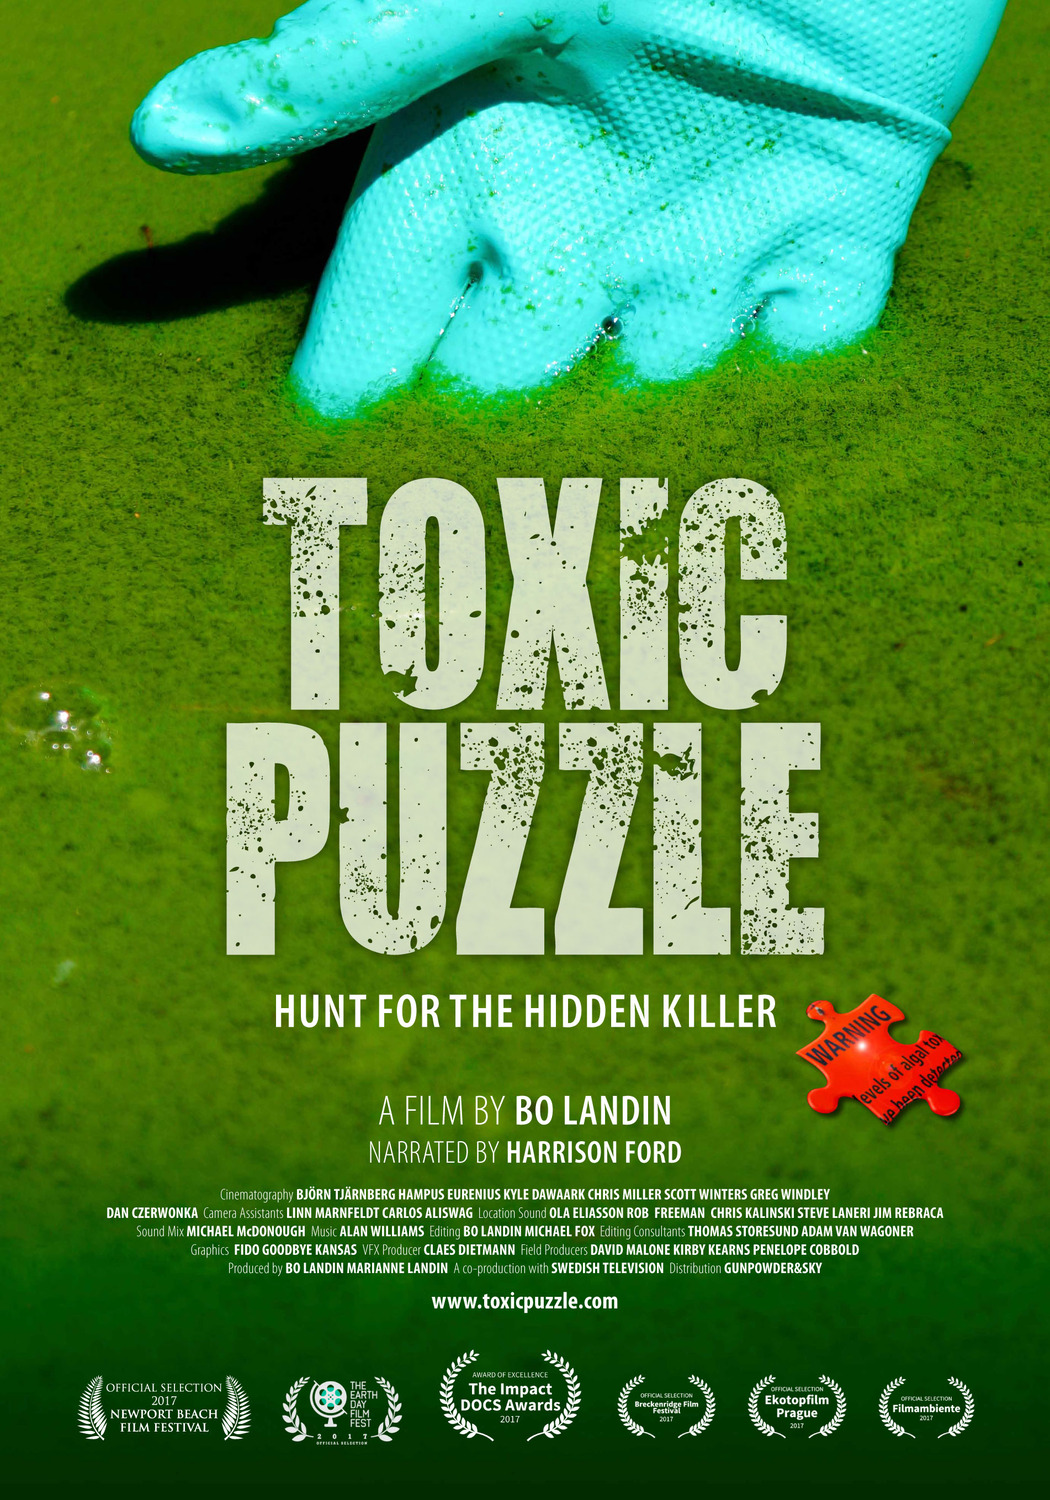 Extra Large Movie Poster Image for Toxic Puzzle 